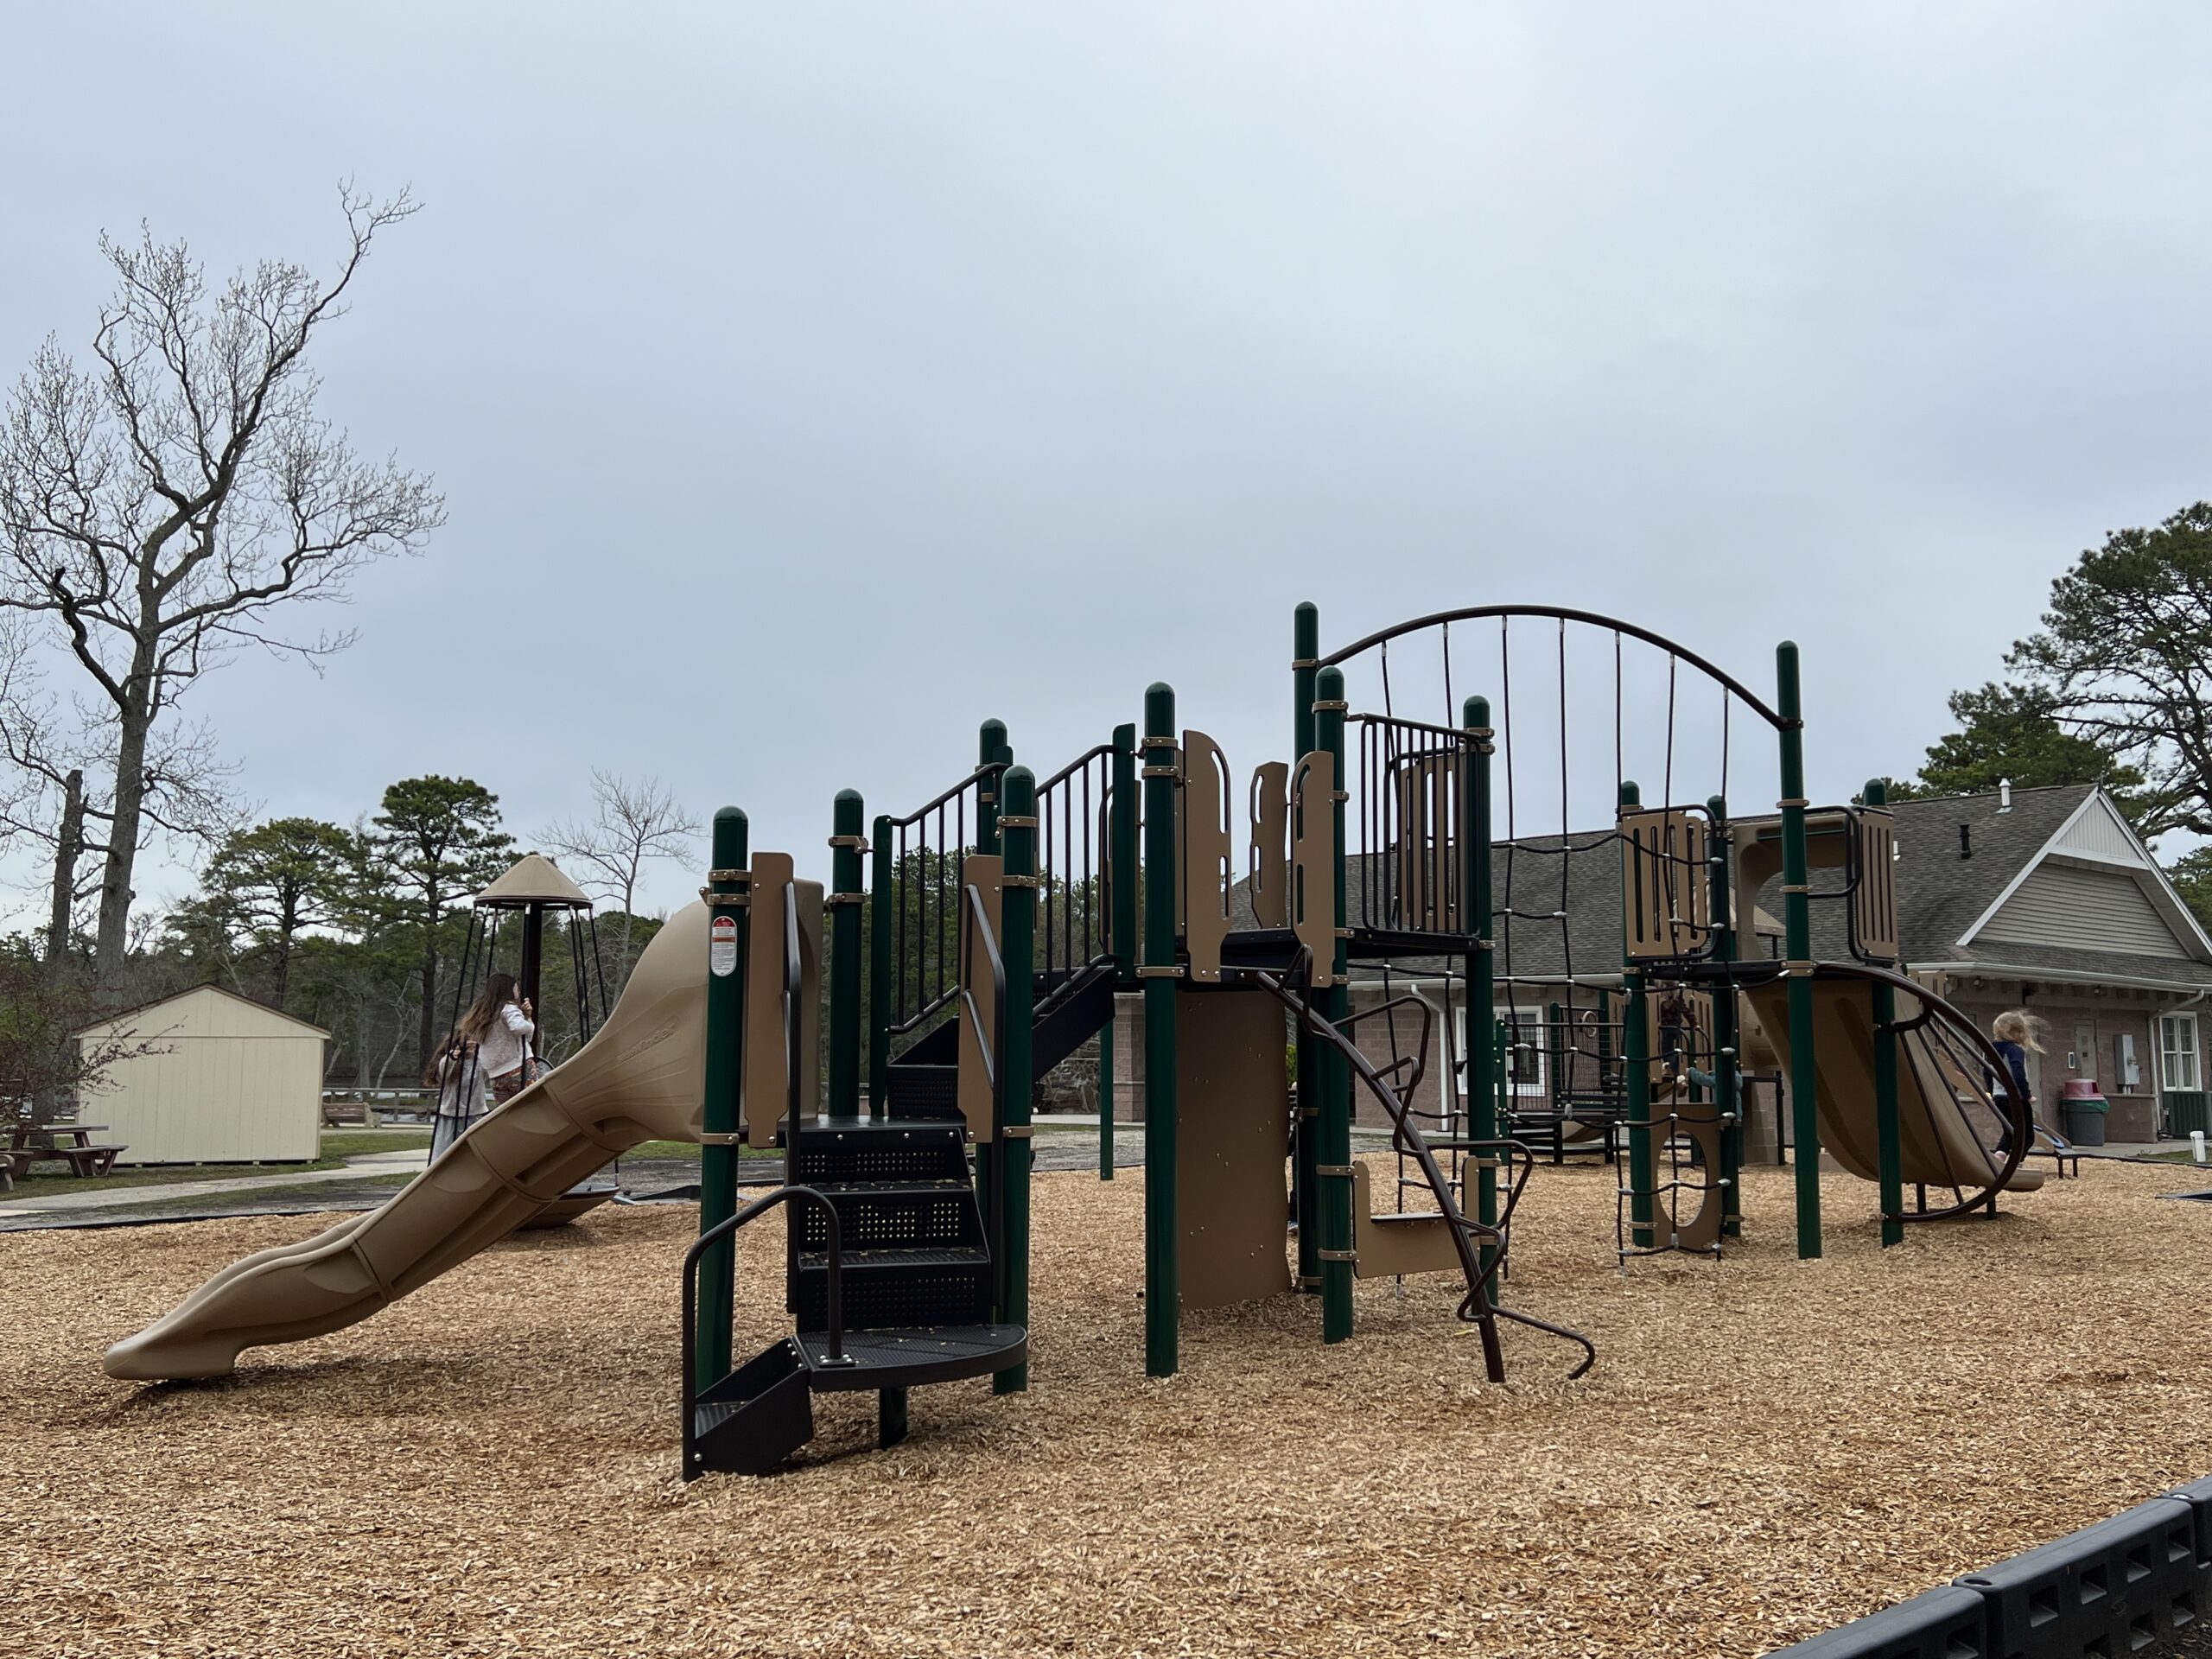 Alternate side of larger structure at Birch Grove Park Playground in Northfield NJ WIDE image